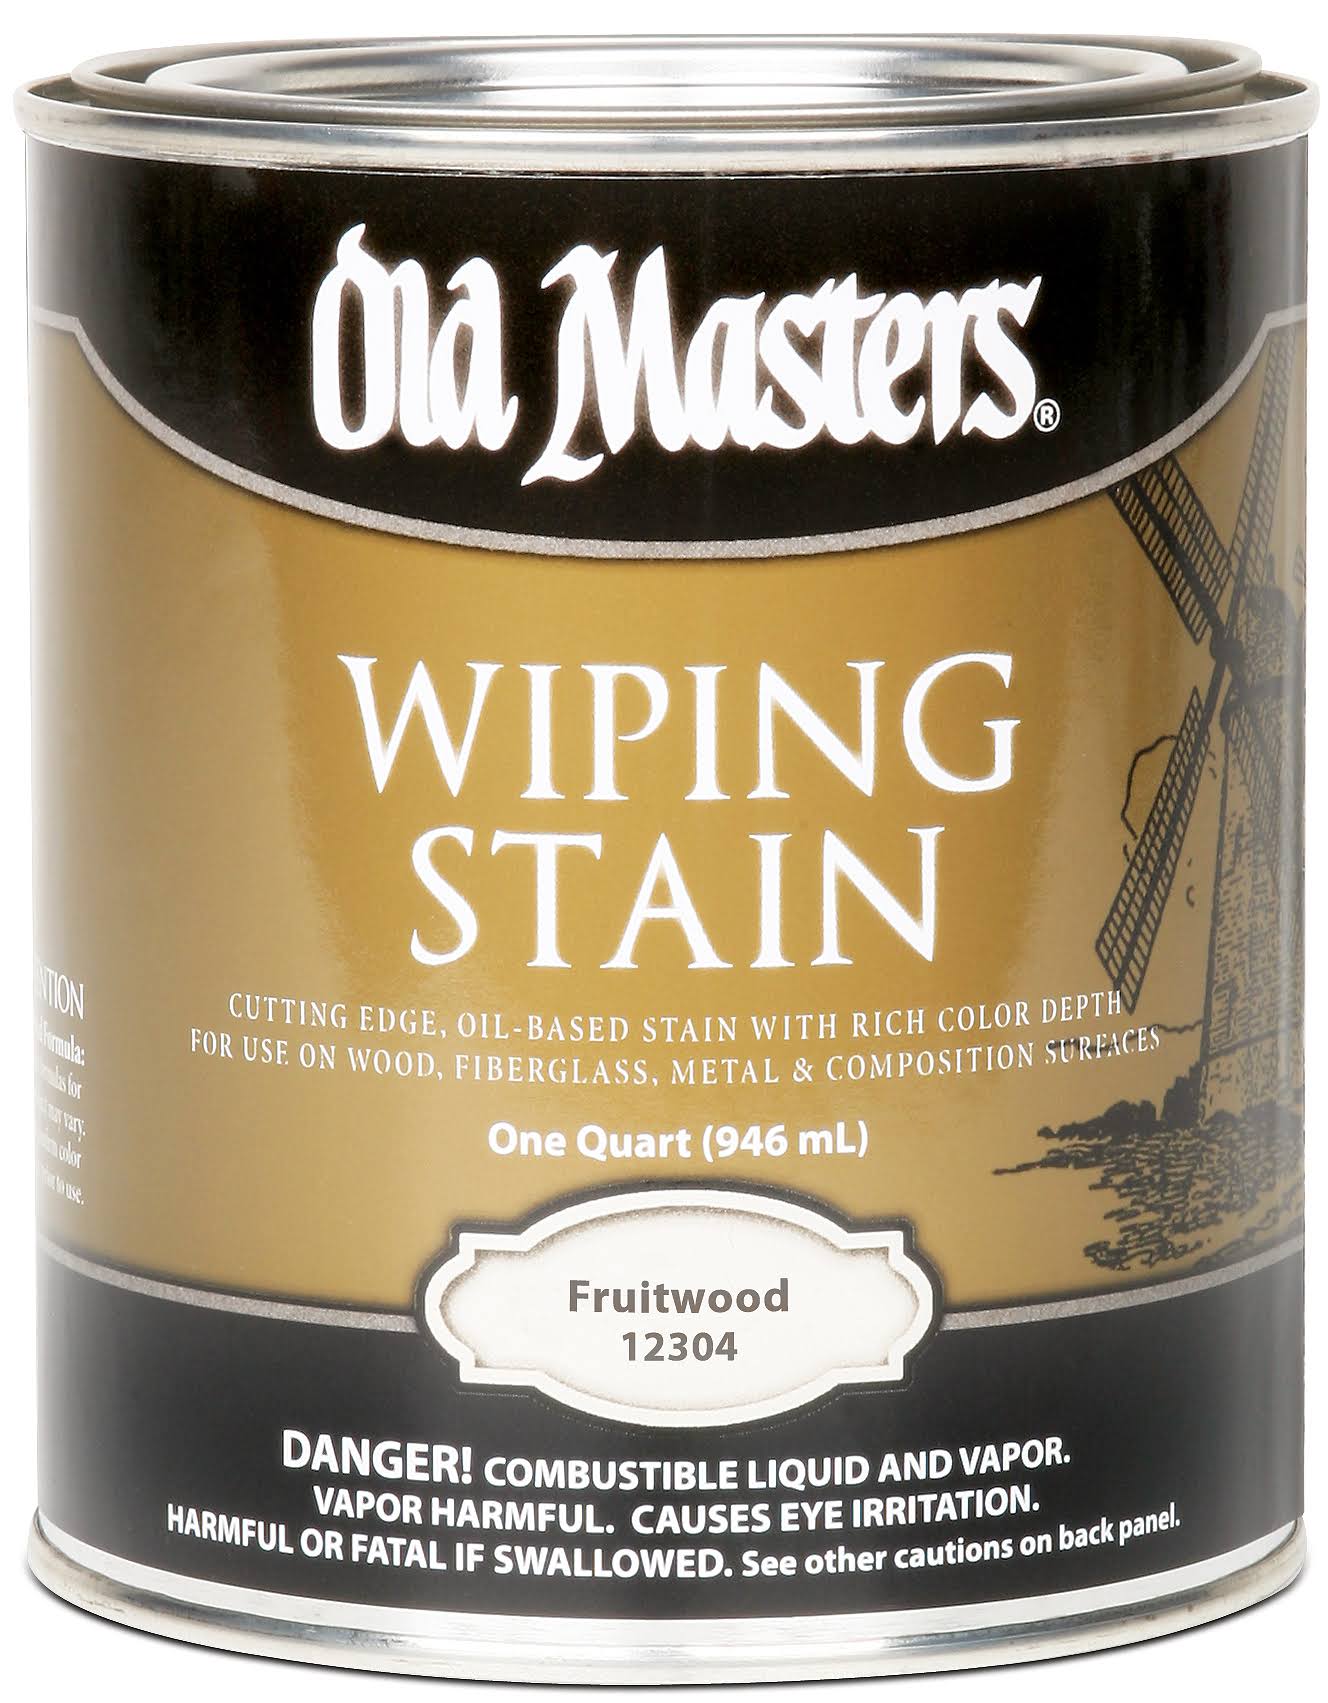 Old Masters 12304 1 Quart Fruitwood Wiping Stain